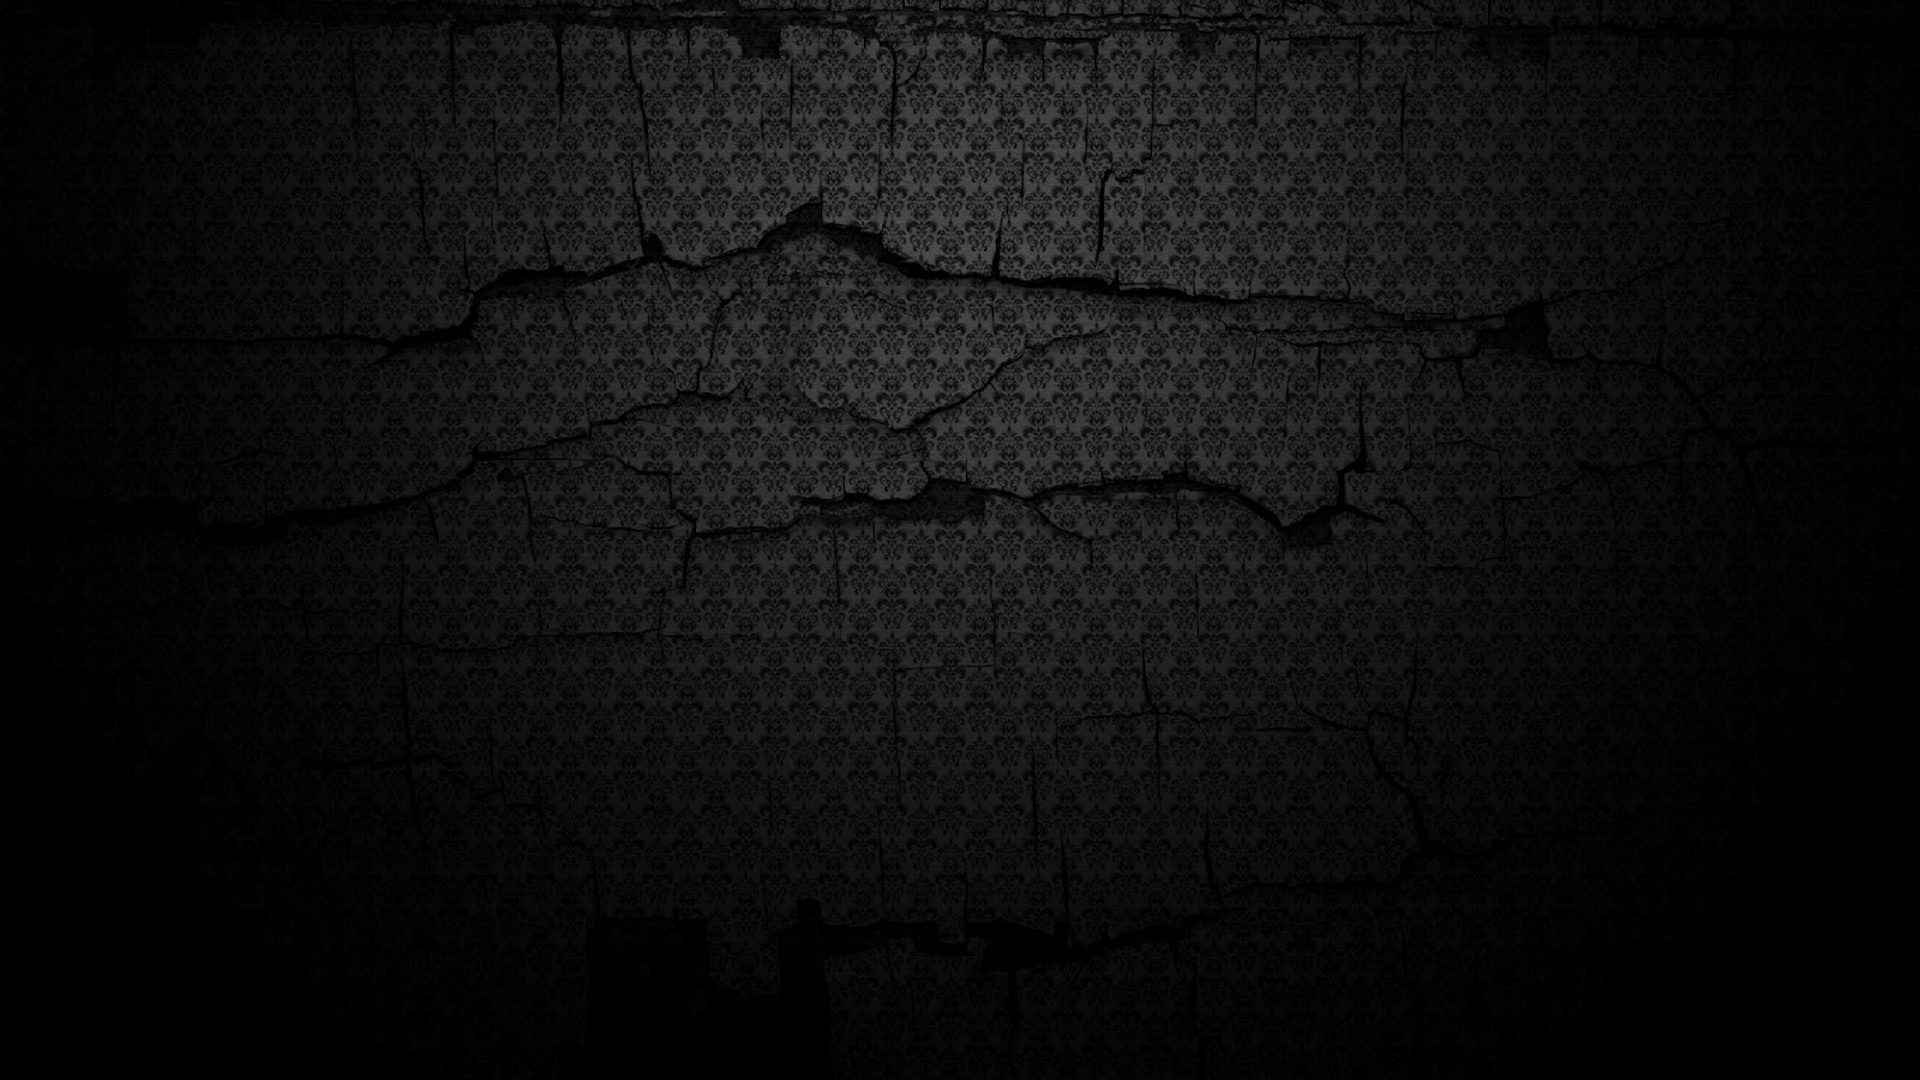 Cool Black Wallpaper For Desktop with high-resolution 1920x1080 pixel. You can use this wallpaper for your Windows and Mac OS computers as well as your Android and iPhone smartphones